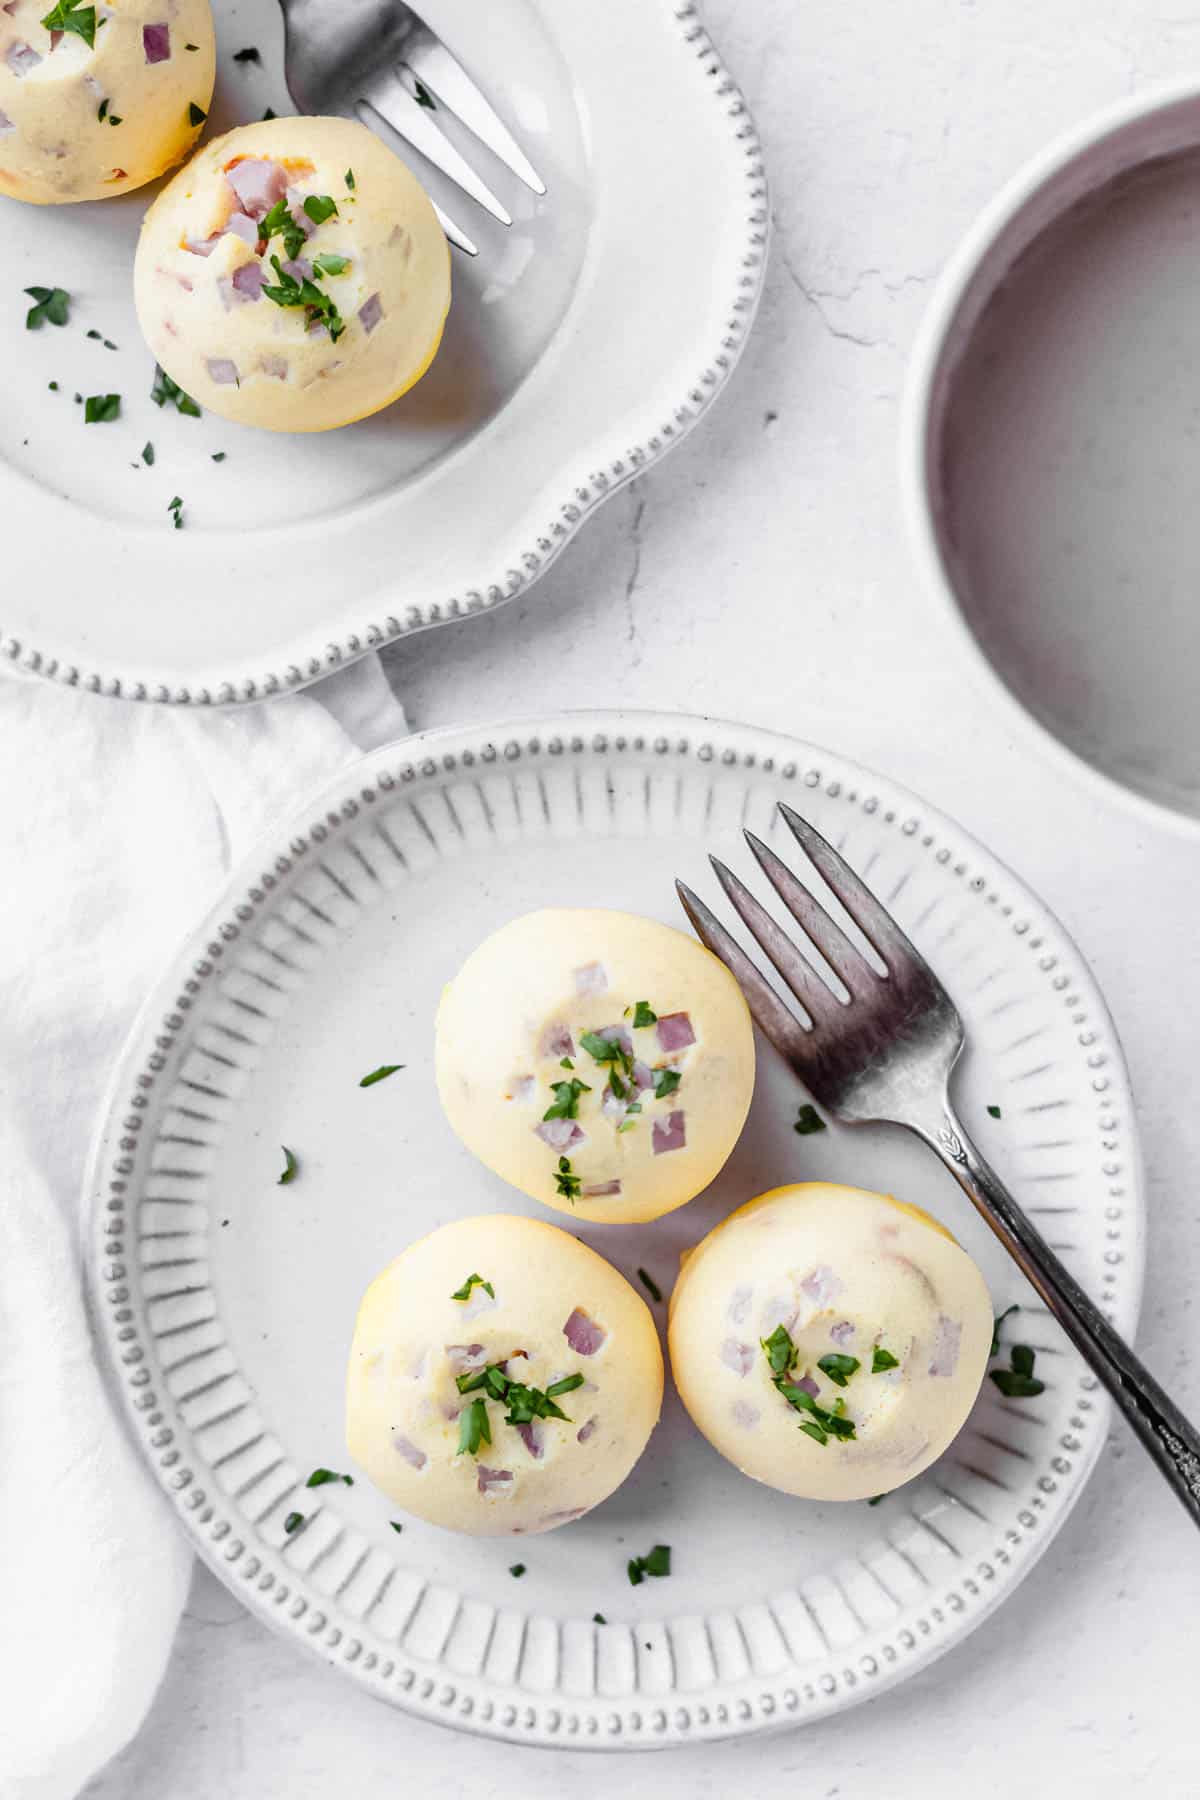 Overhead of 3 instant pot egg bites with ham on a white plate with a second plate of egg bites showing and part of a cup of coffee. There is also a fork on each plate and a white towel off to the side